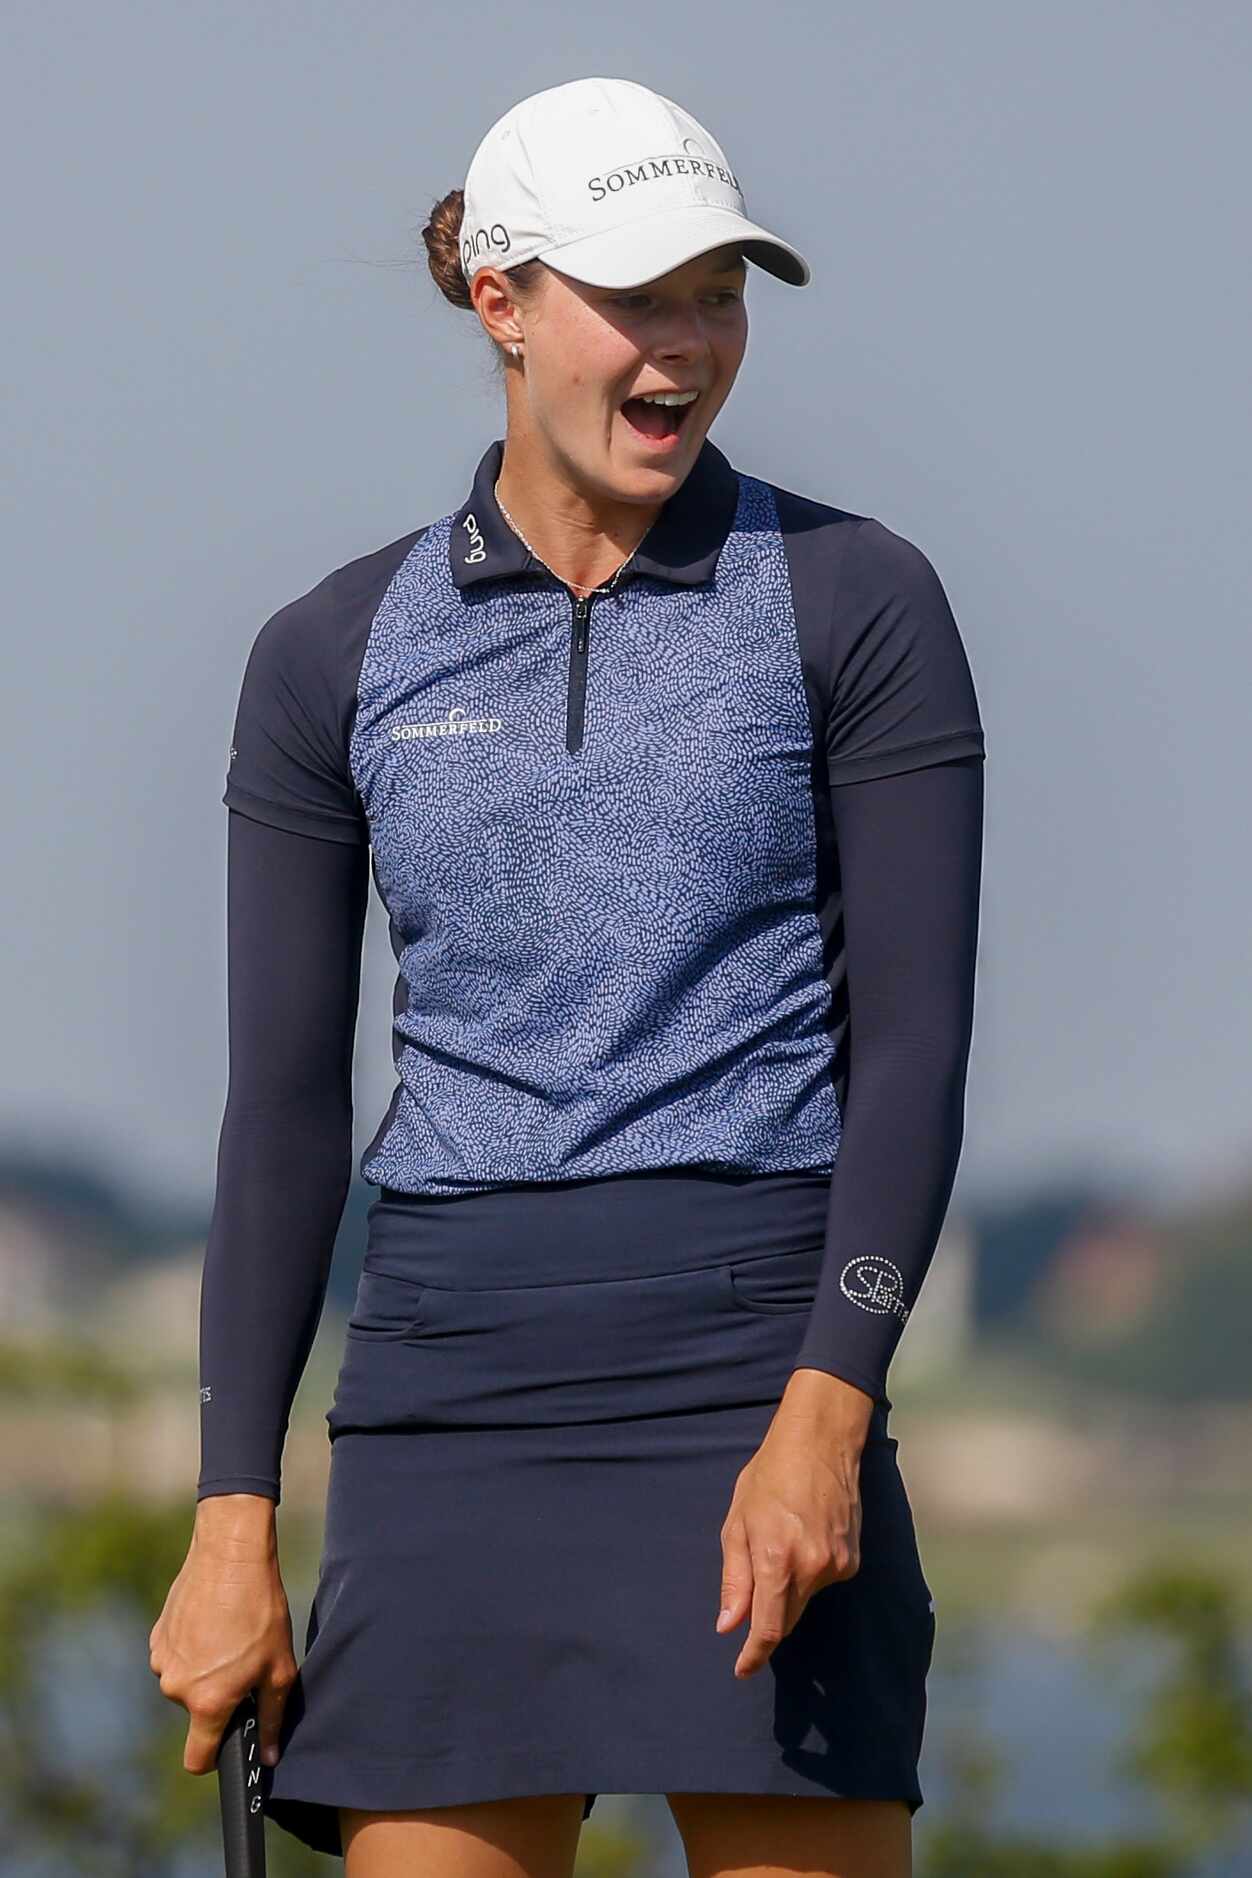 Professional golfer Esther Henseleit reacts after missing a putt for birdie on the No. 13...